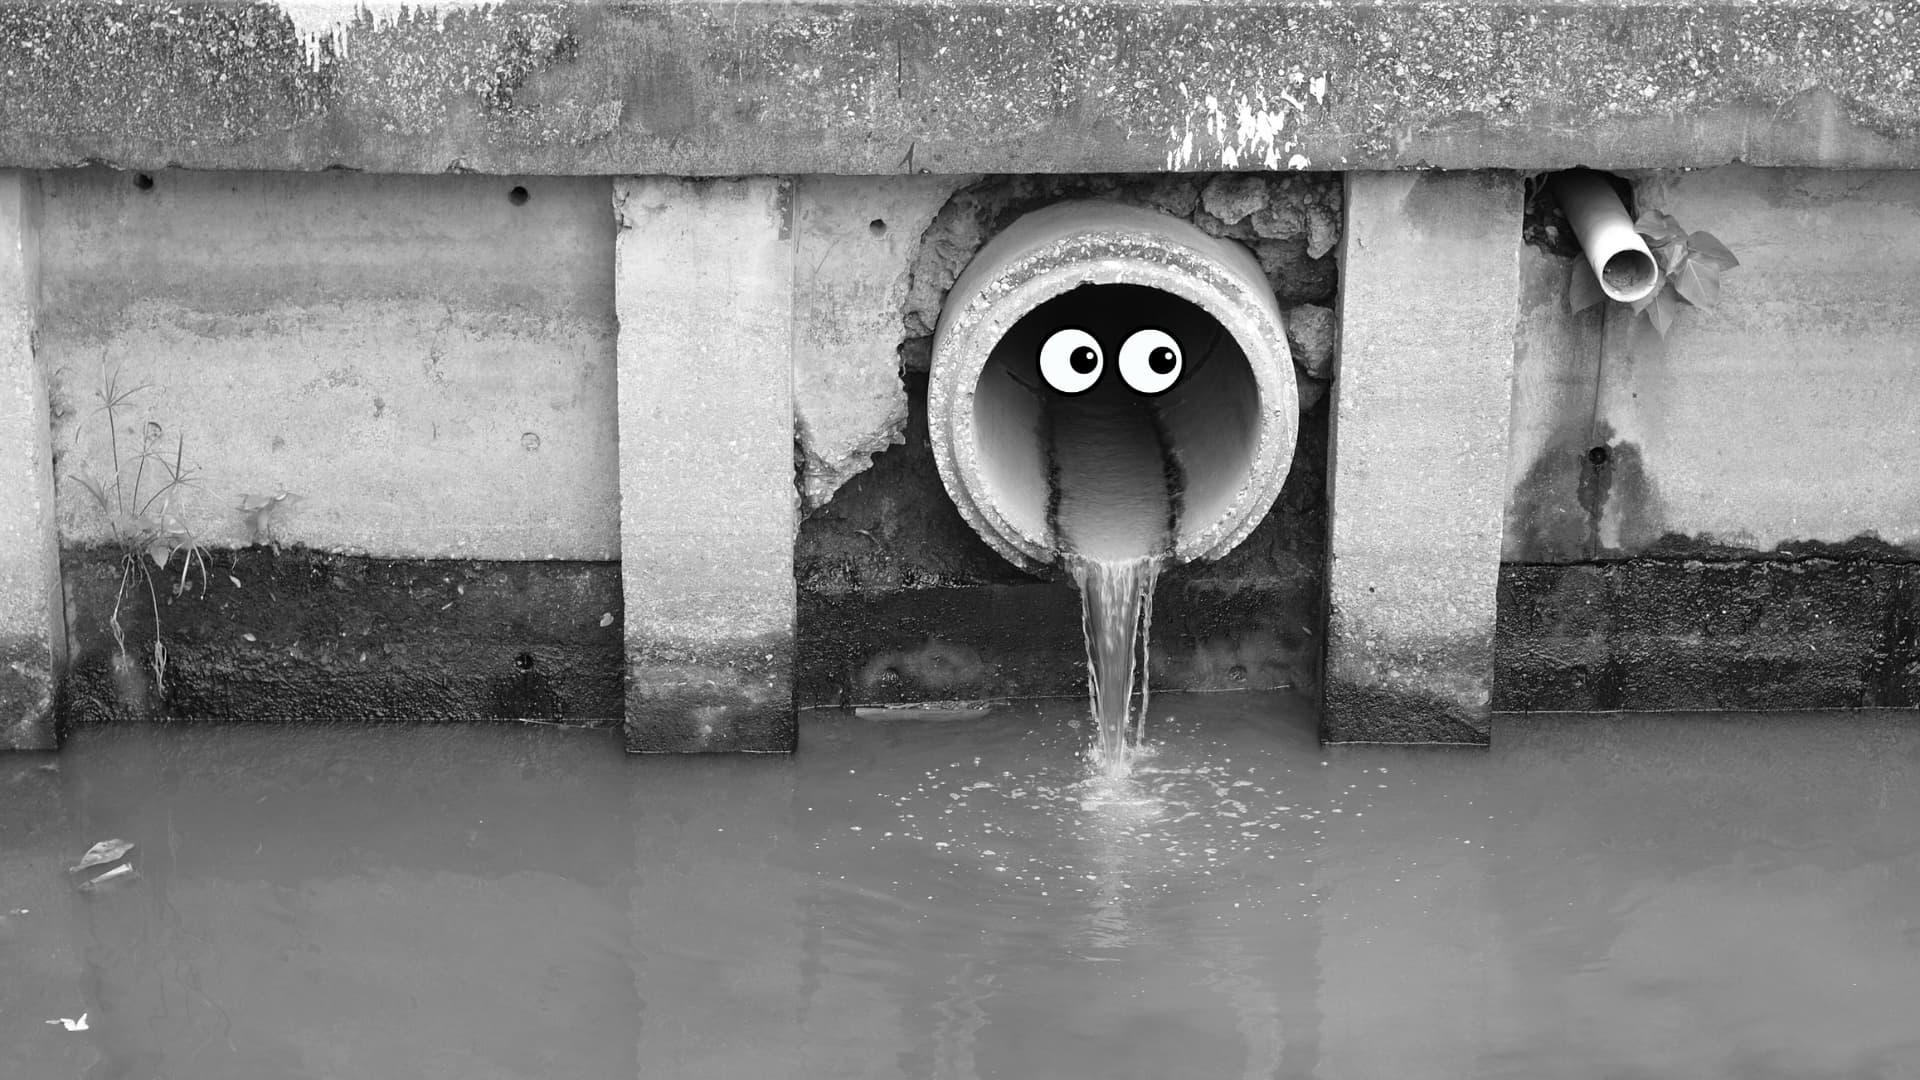 sewage outlet discharging into waterway. the outlet has googly eyes to make it look like a face.